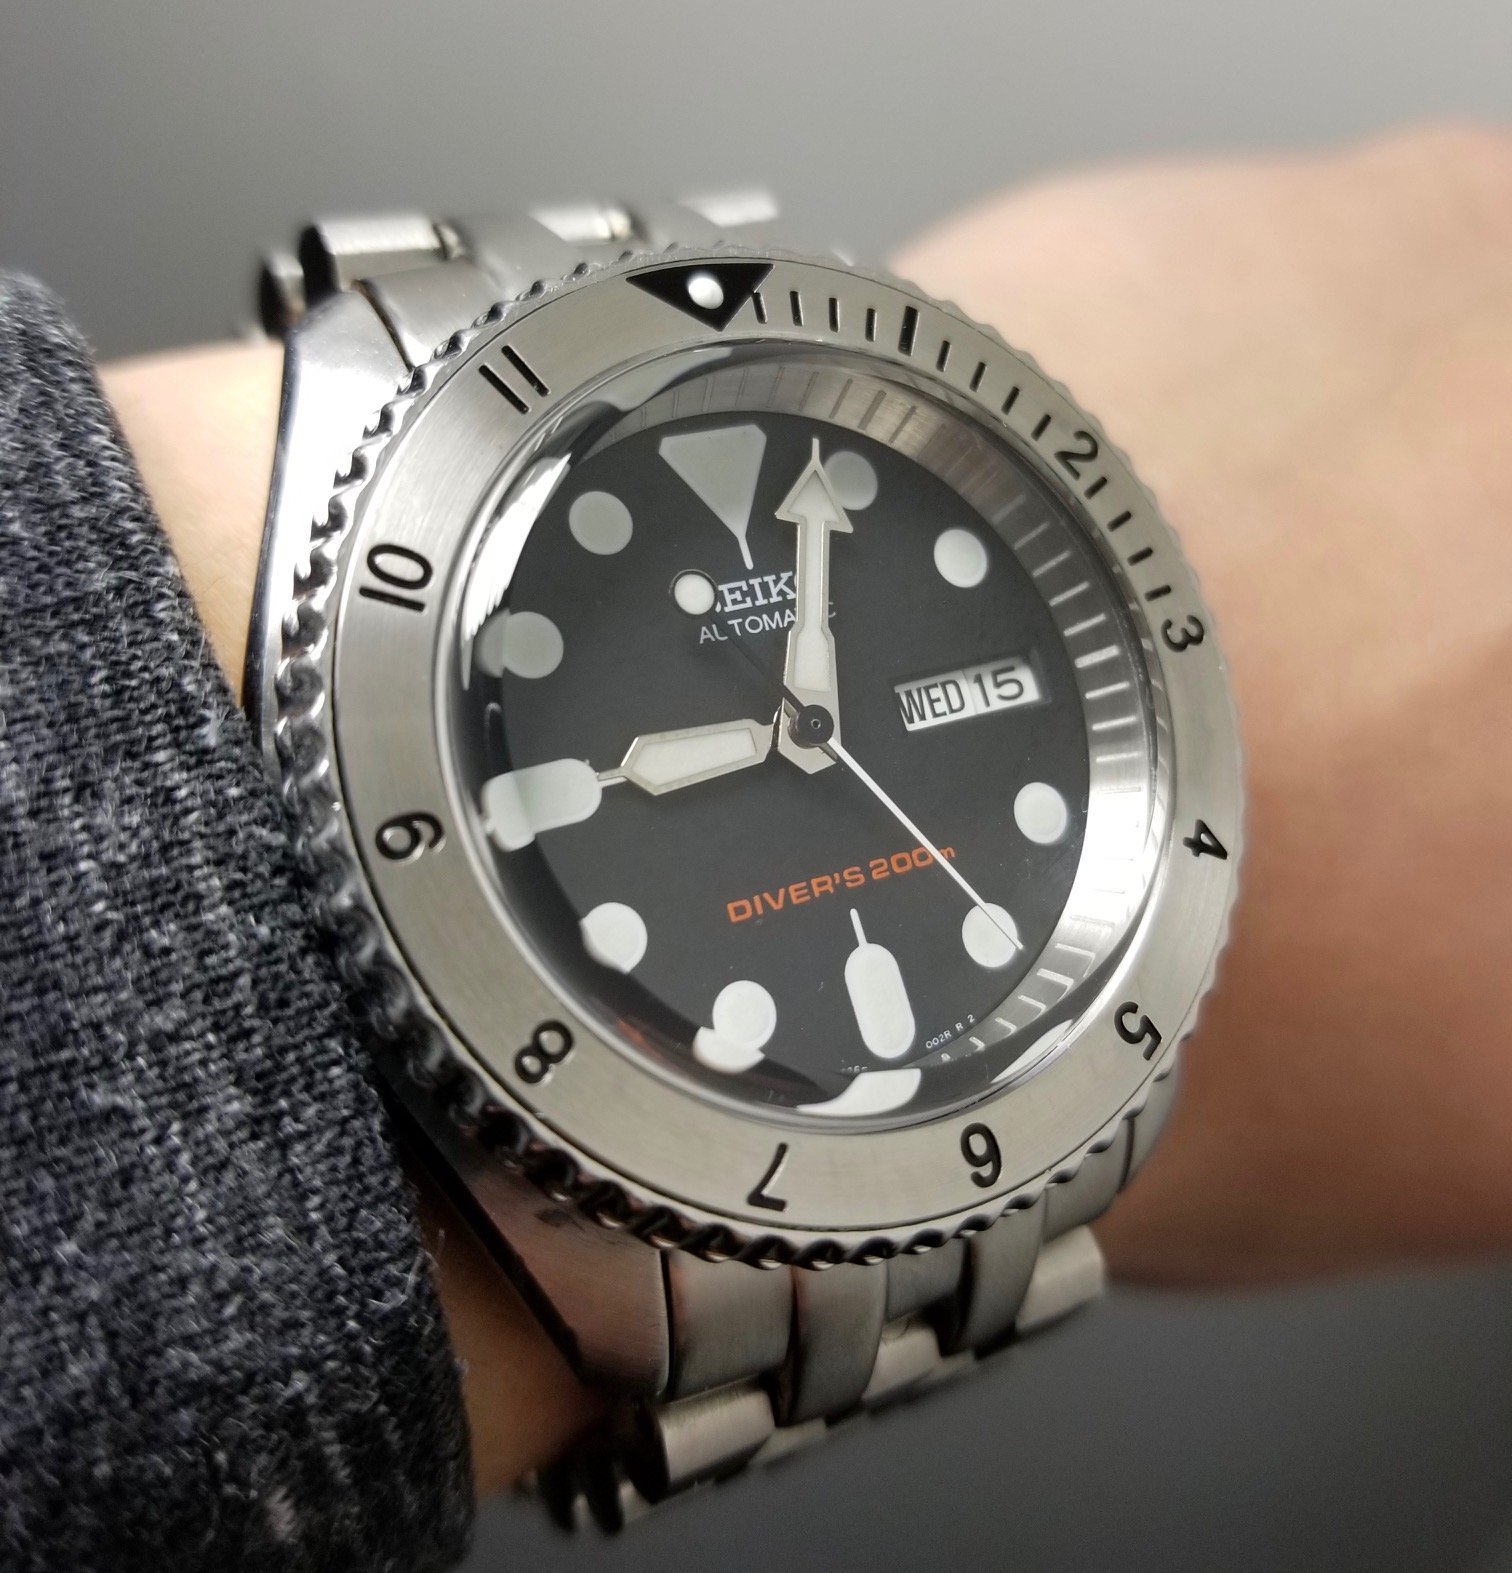 SKX007 SRPD Top Hat Sapphire Crystal | Crystaltimes USA | CT101